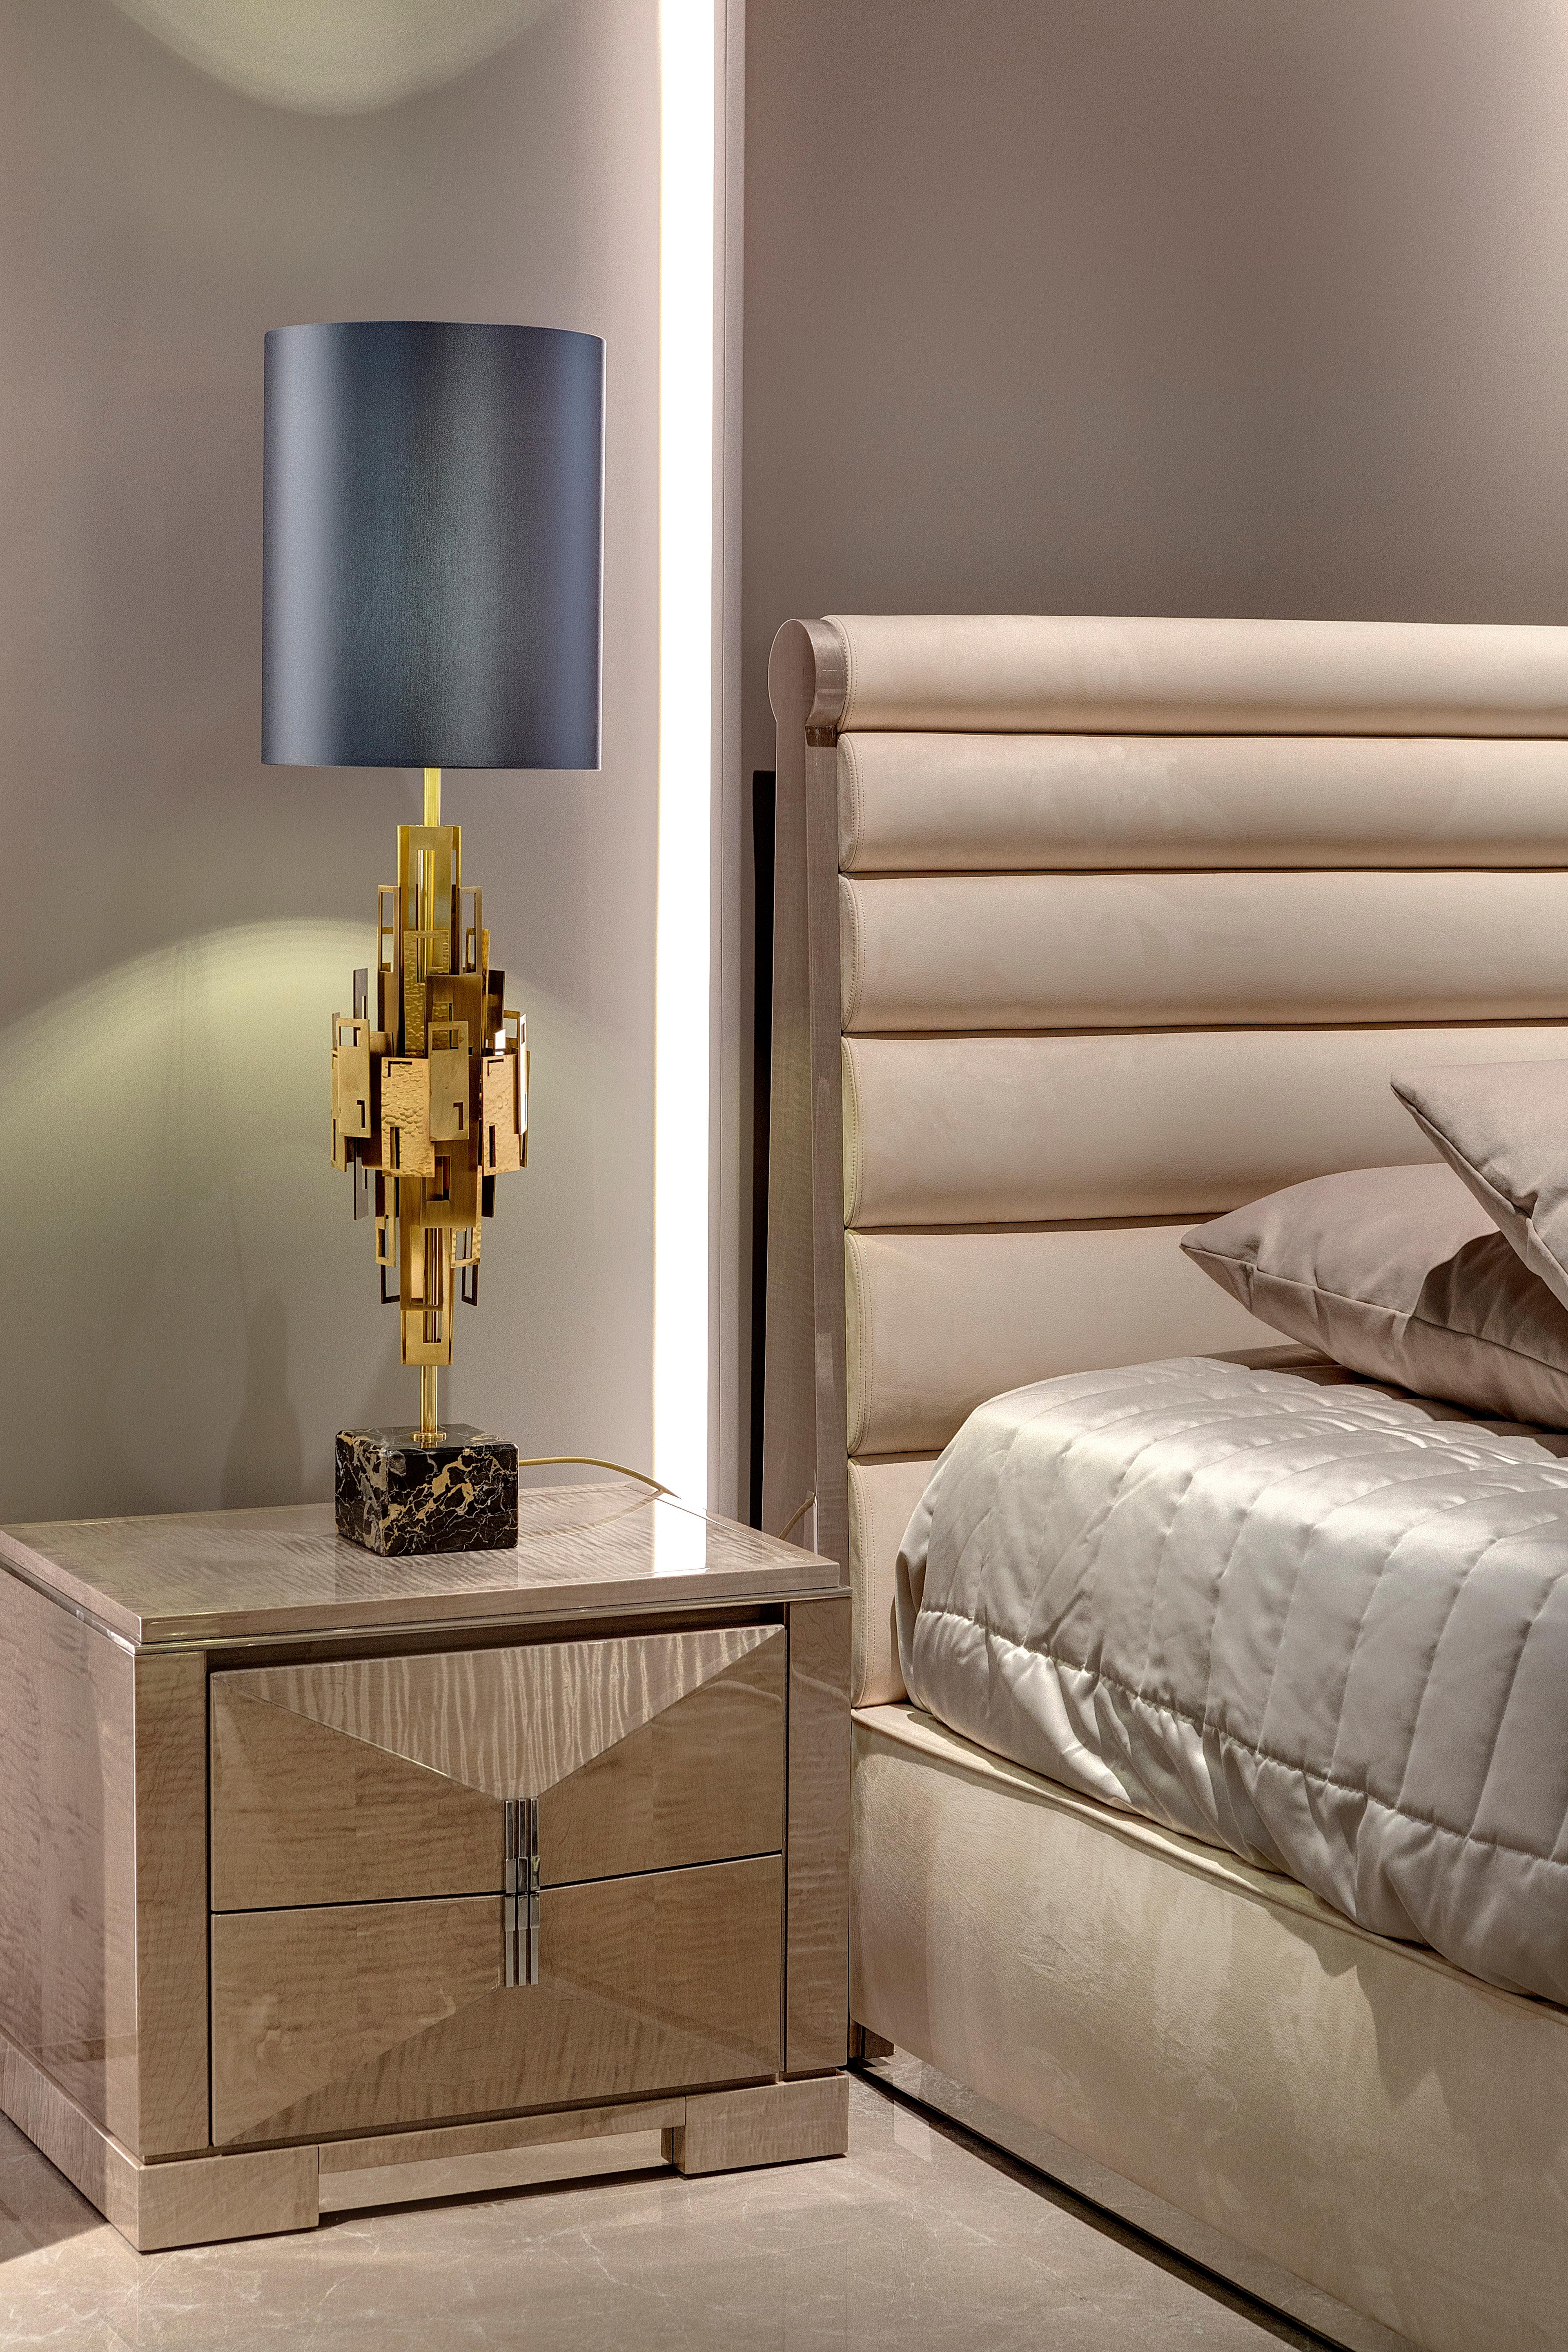 Glam collection, a play of precious hammered and smooth thin sheets in tone-on-tone warm gold or cold nickel play of finishes to characterize its main structure.

Brass structure in natural and burnished and brushed brass finishes on plain and